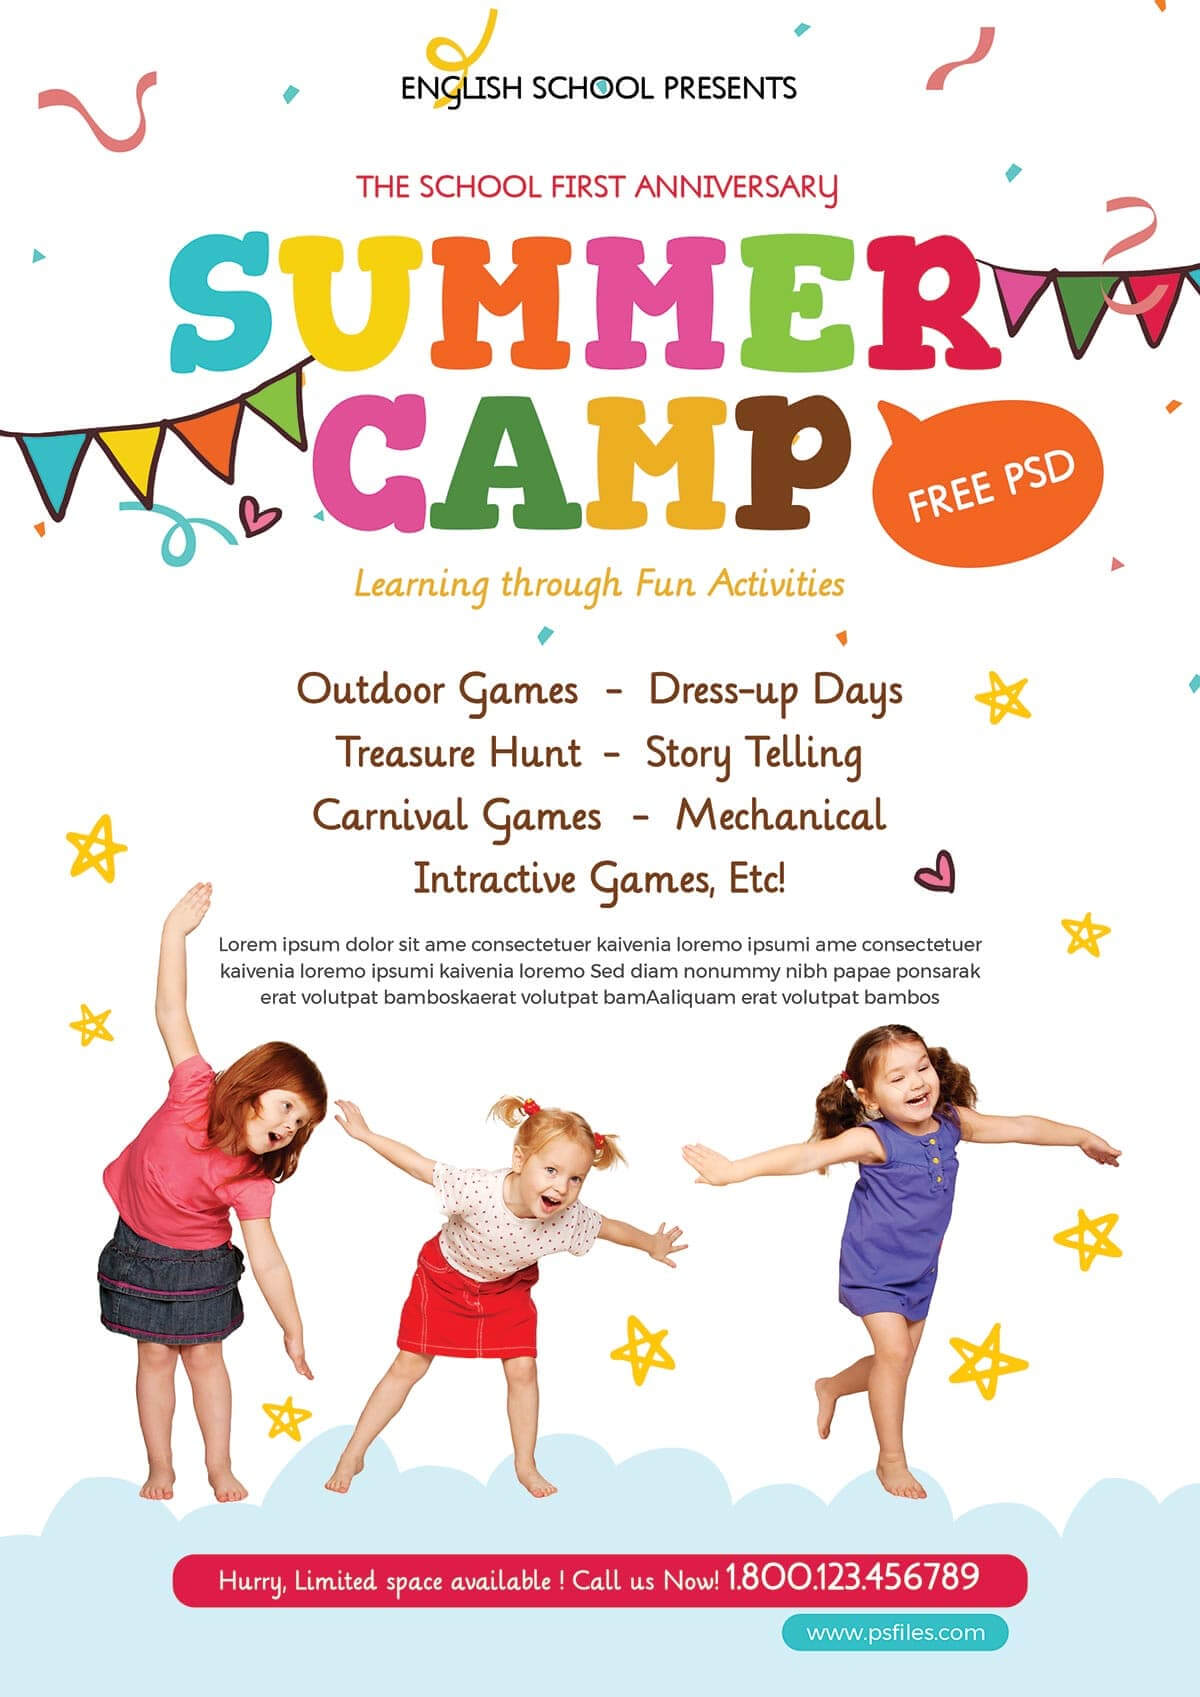 Kids Summer Camp Party Free Psd Flyer Template – Stockpsd Within Summer Camp Brochure Template Free Download